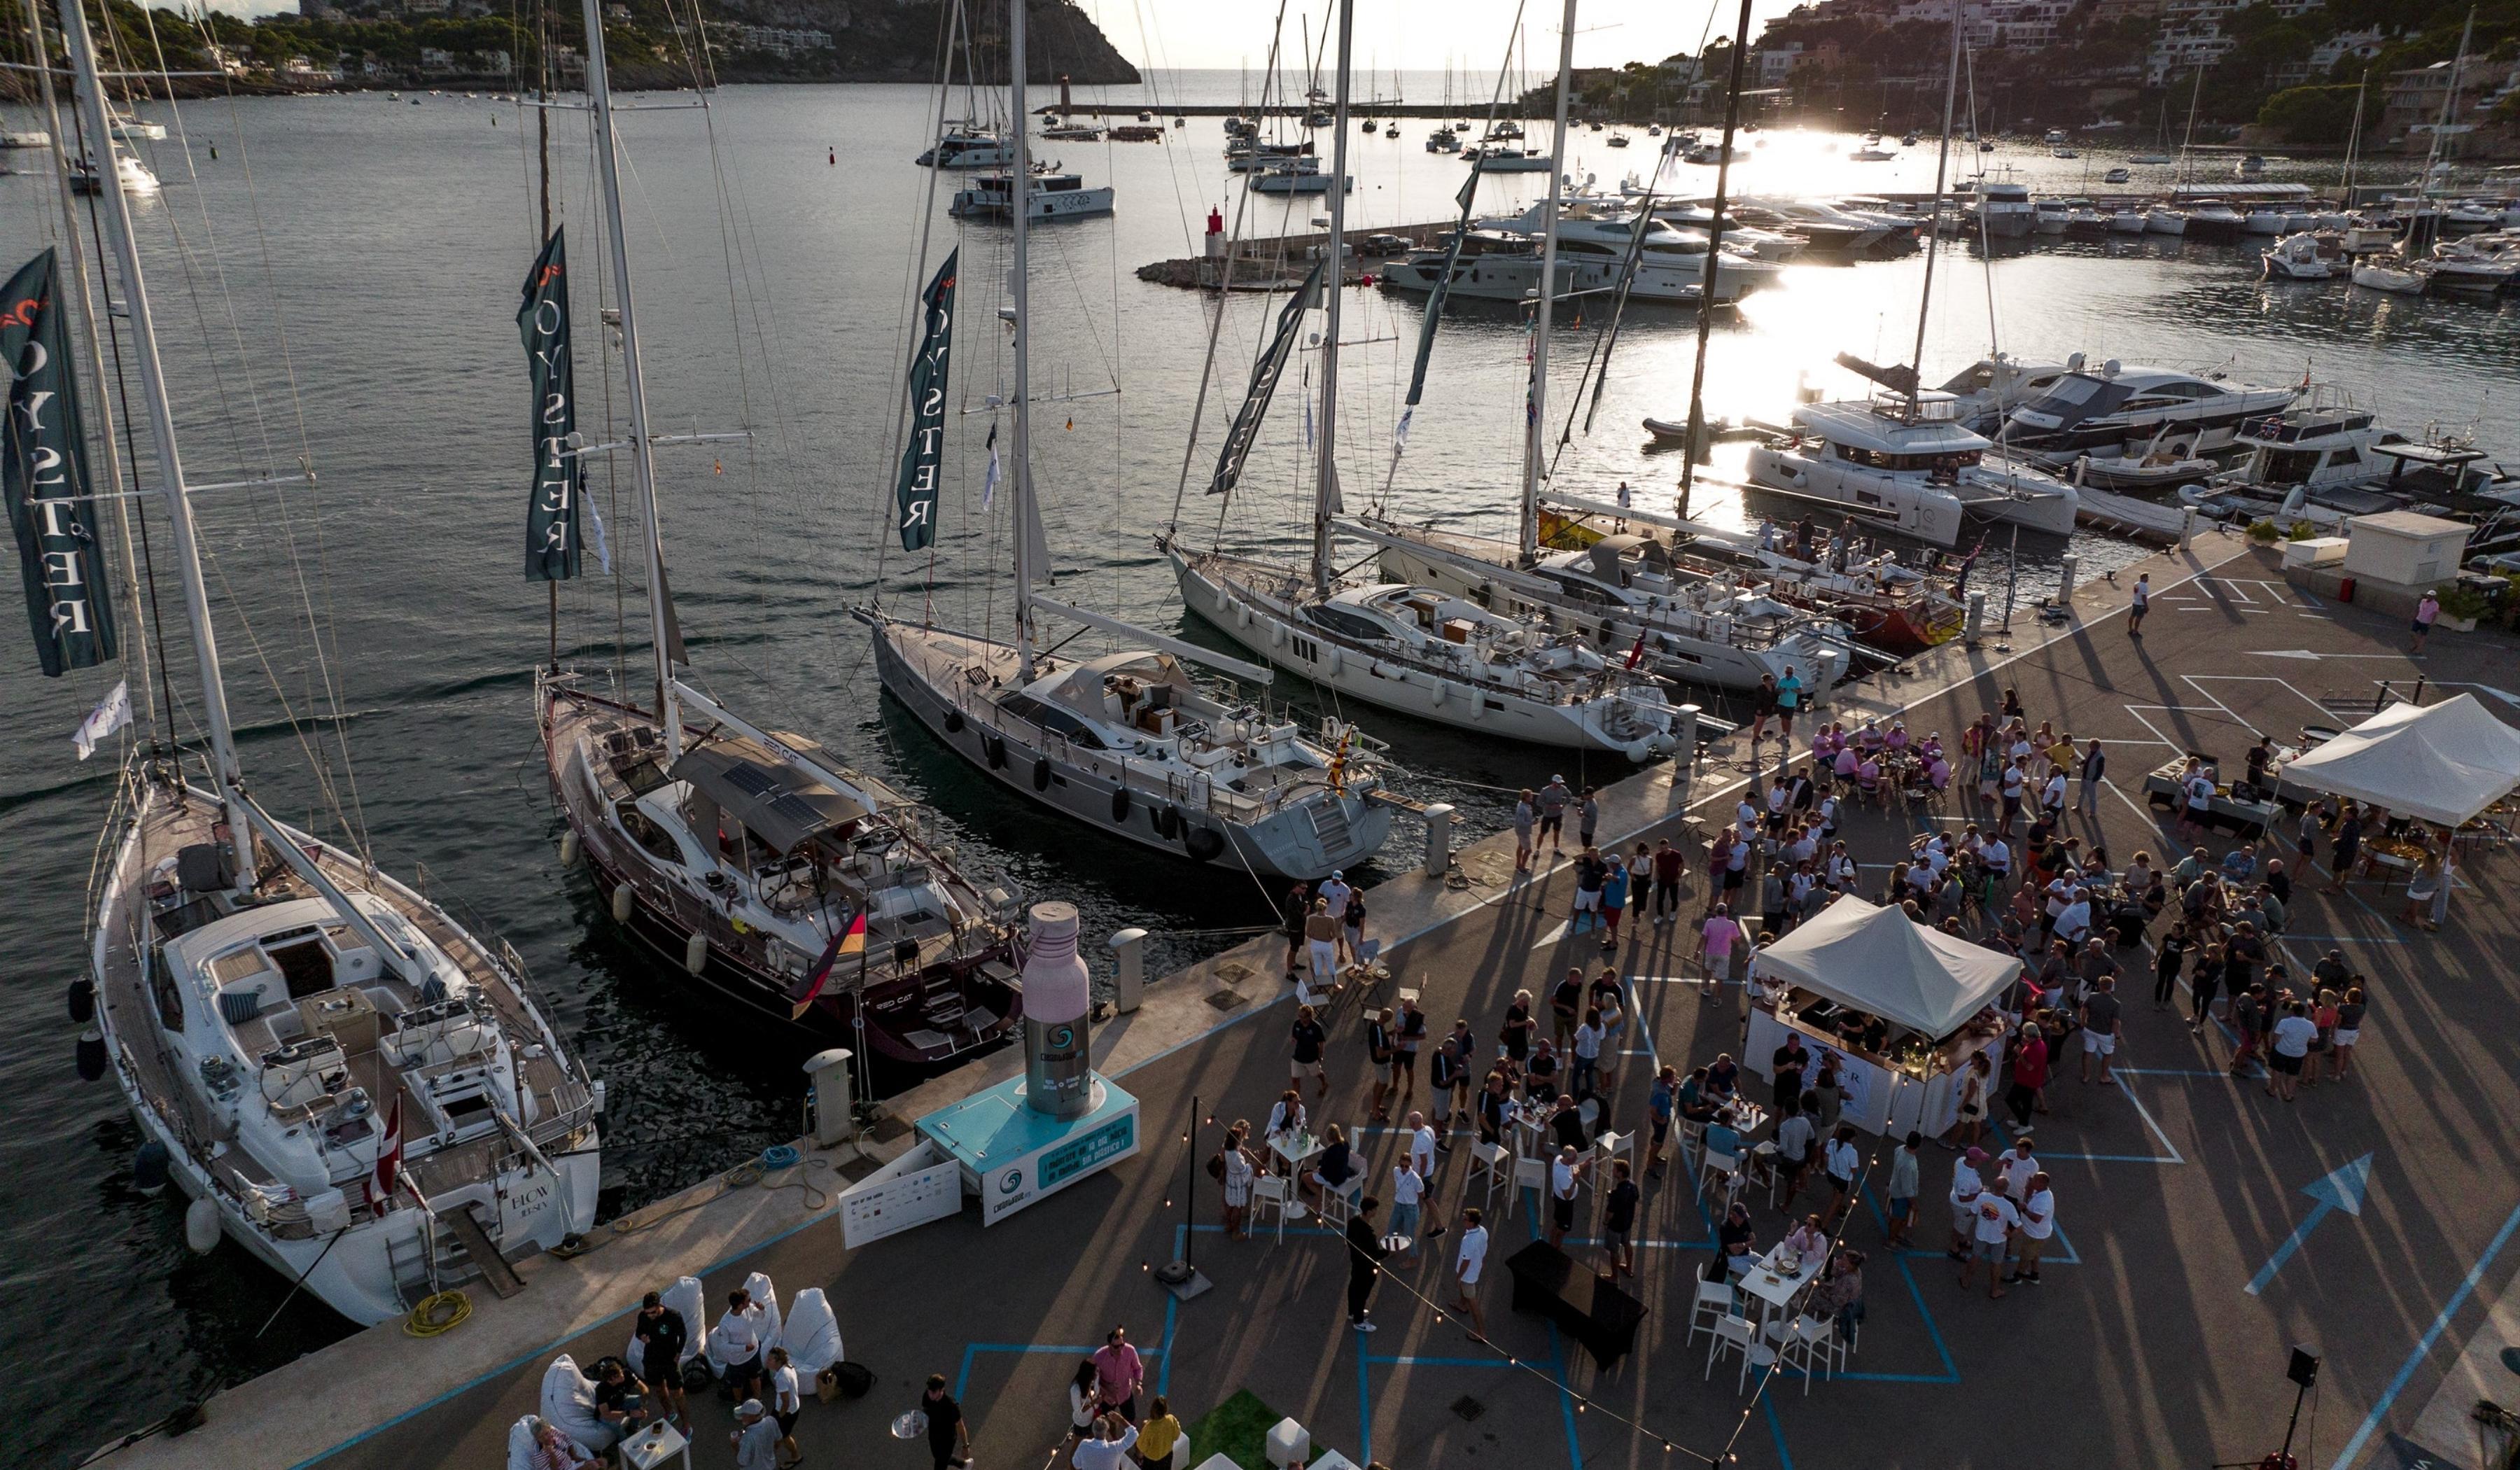 The Oyster Palma Regatta back with a bang | Oyster Yachts | Oyster Yachts